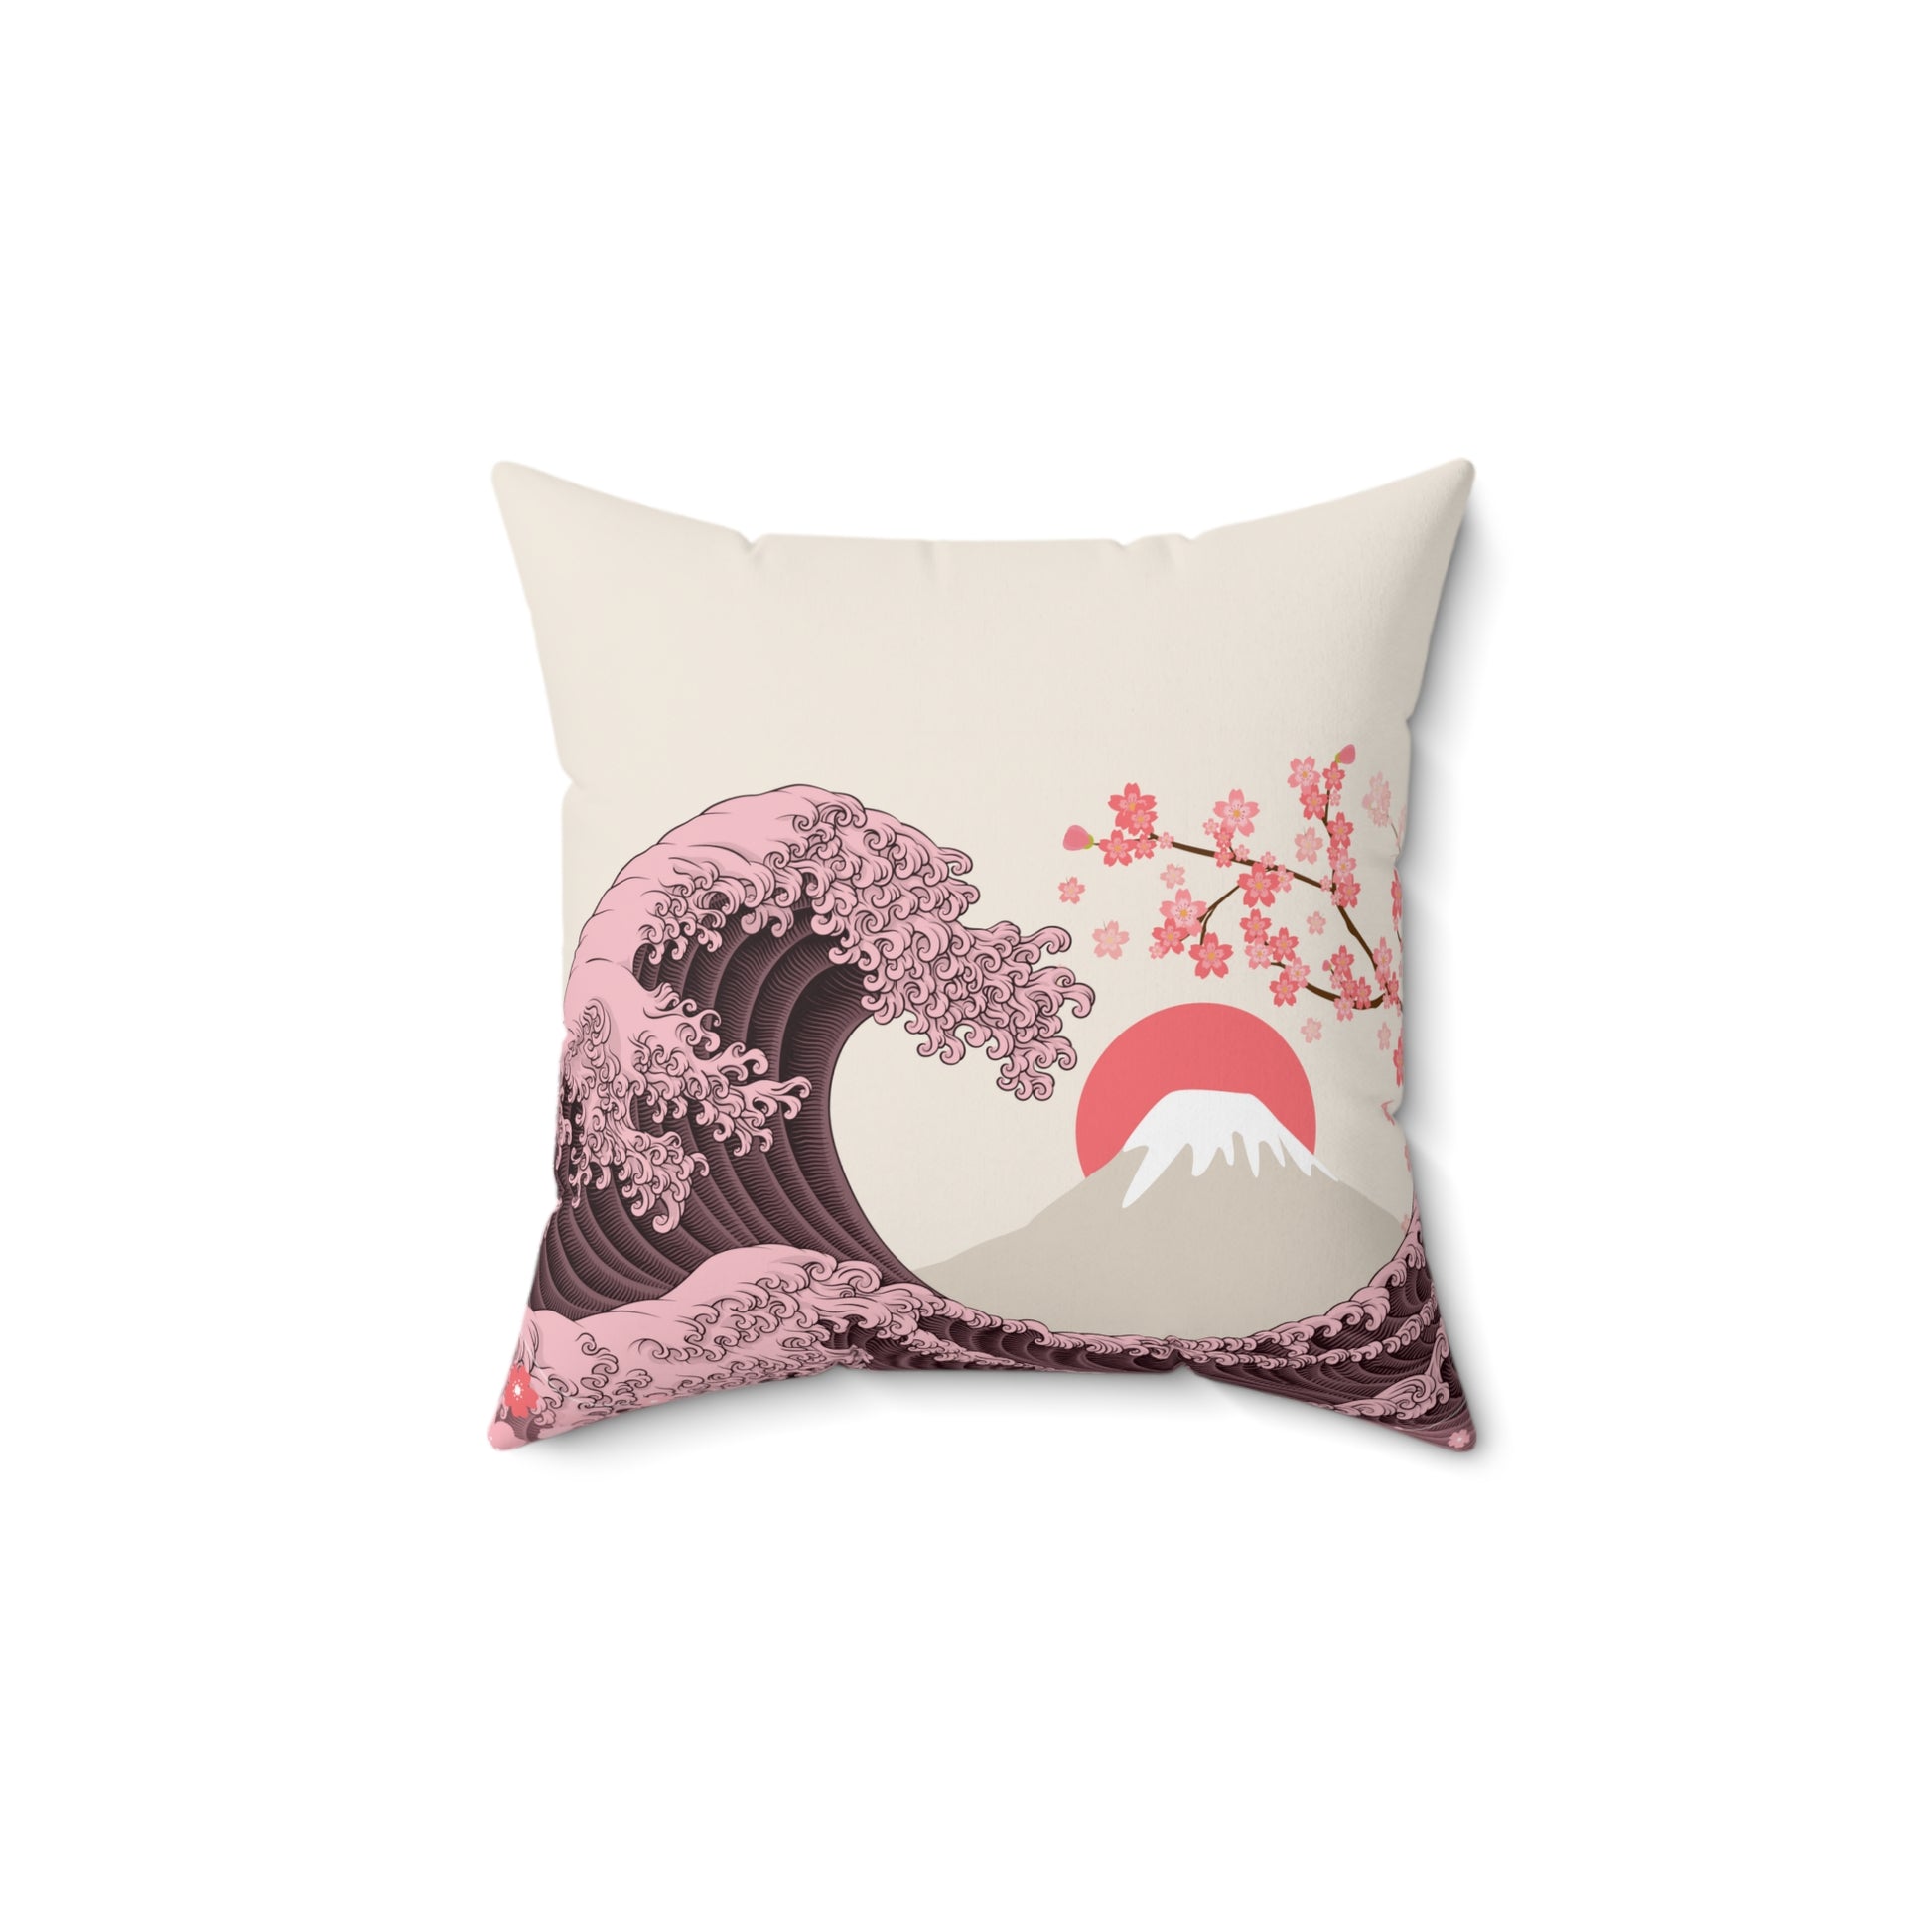 The Light Pink Great Wave Square Pillow